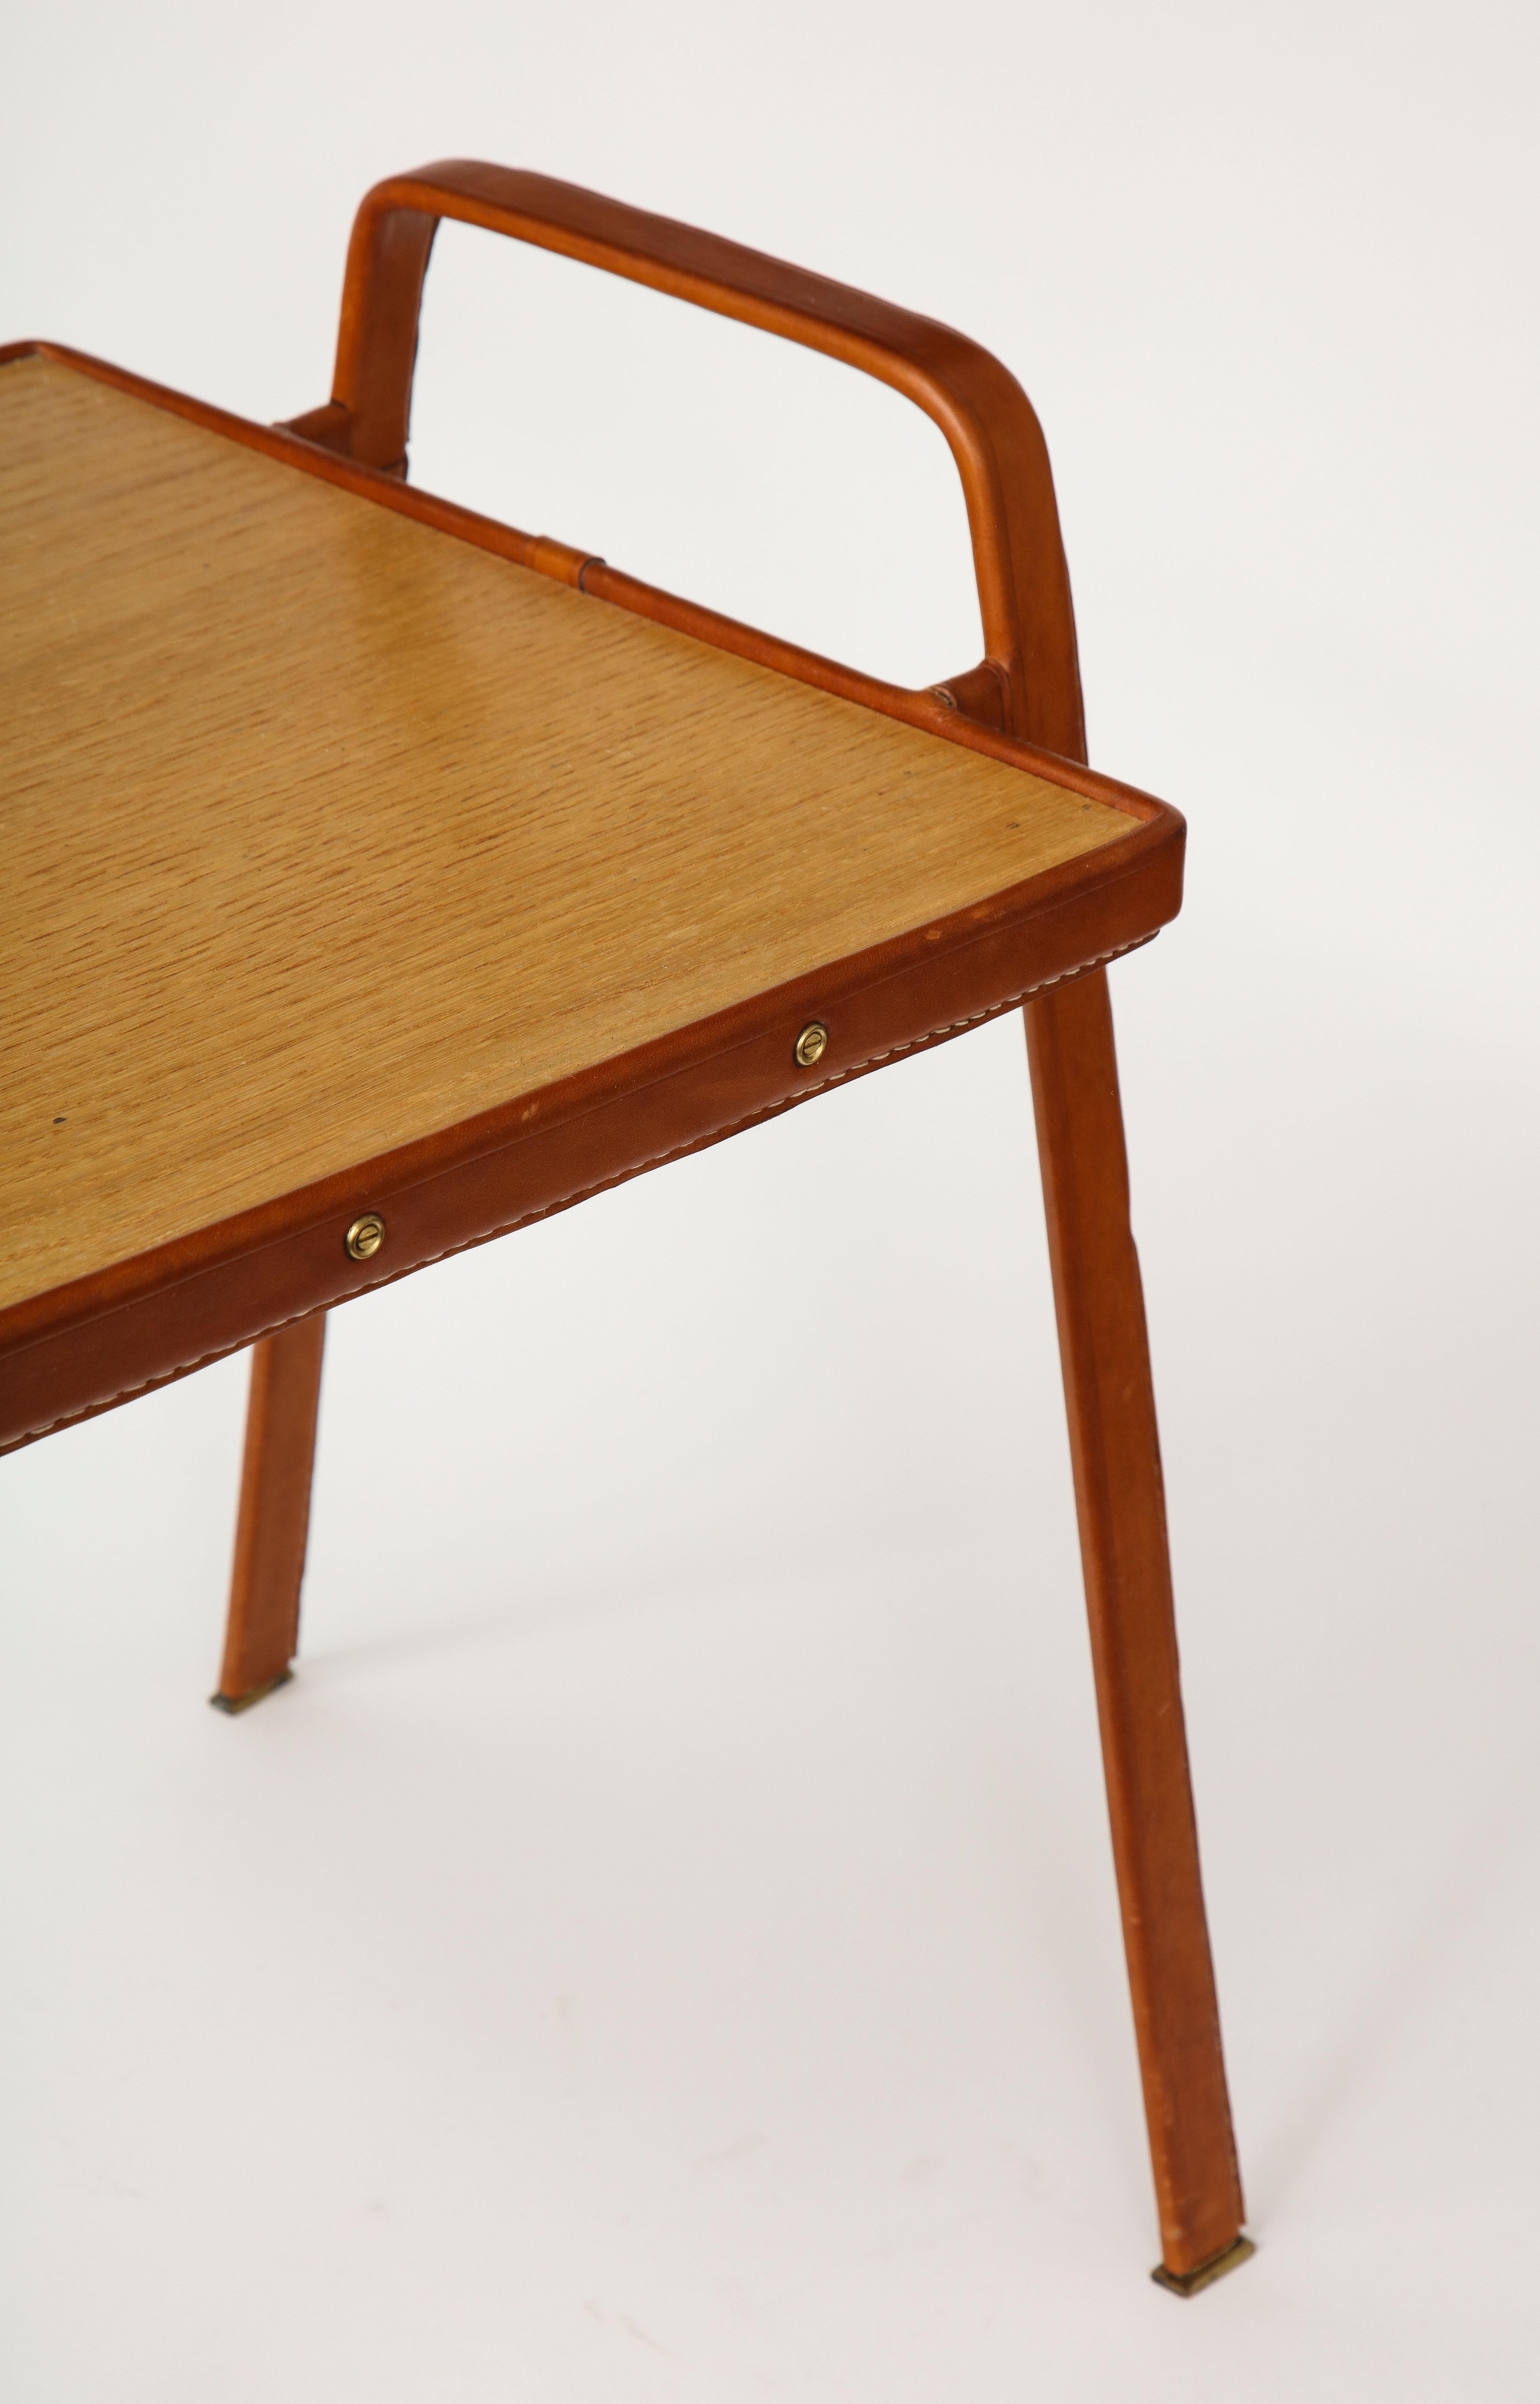 Leather Stitched Side Table by Jacques Adnet, c. 1950 For Sale 1